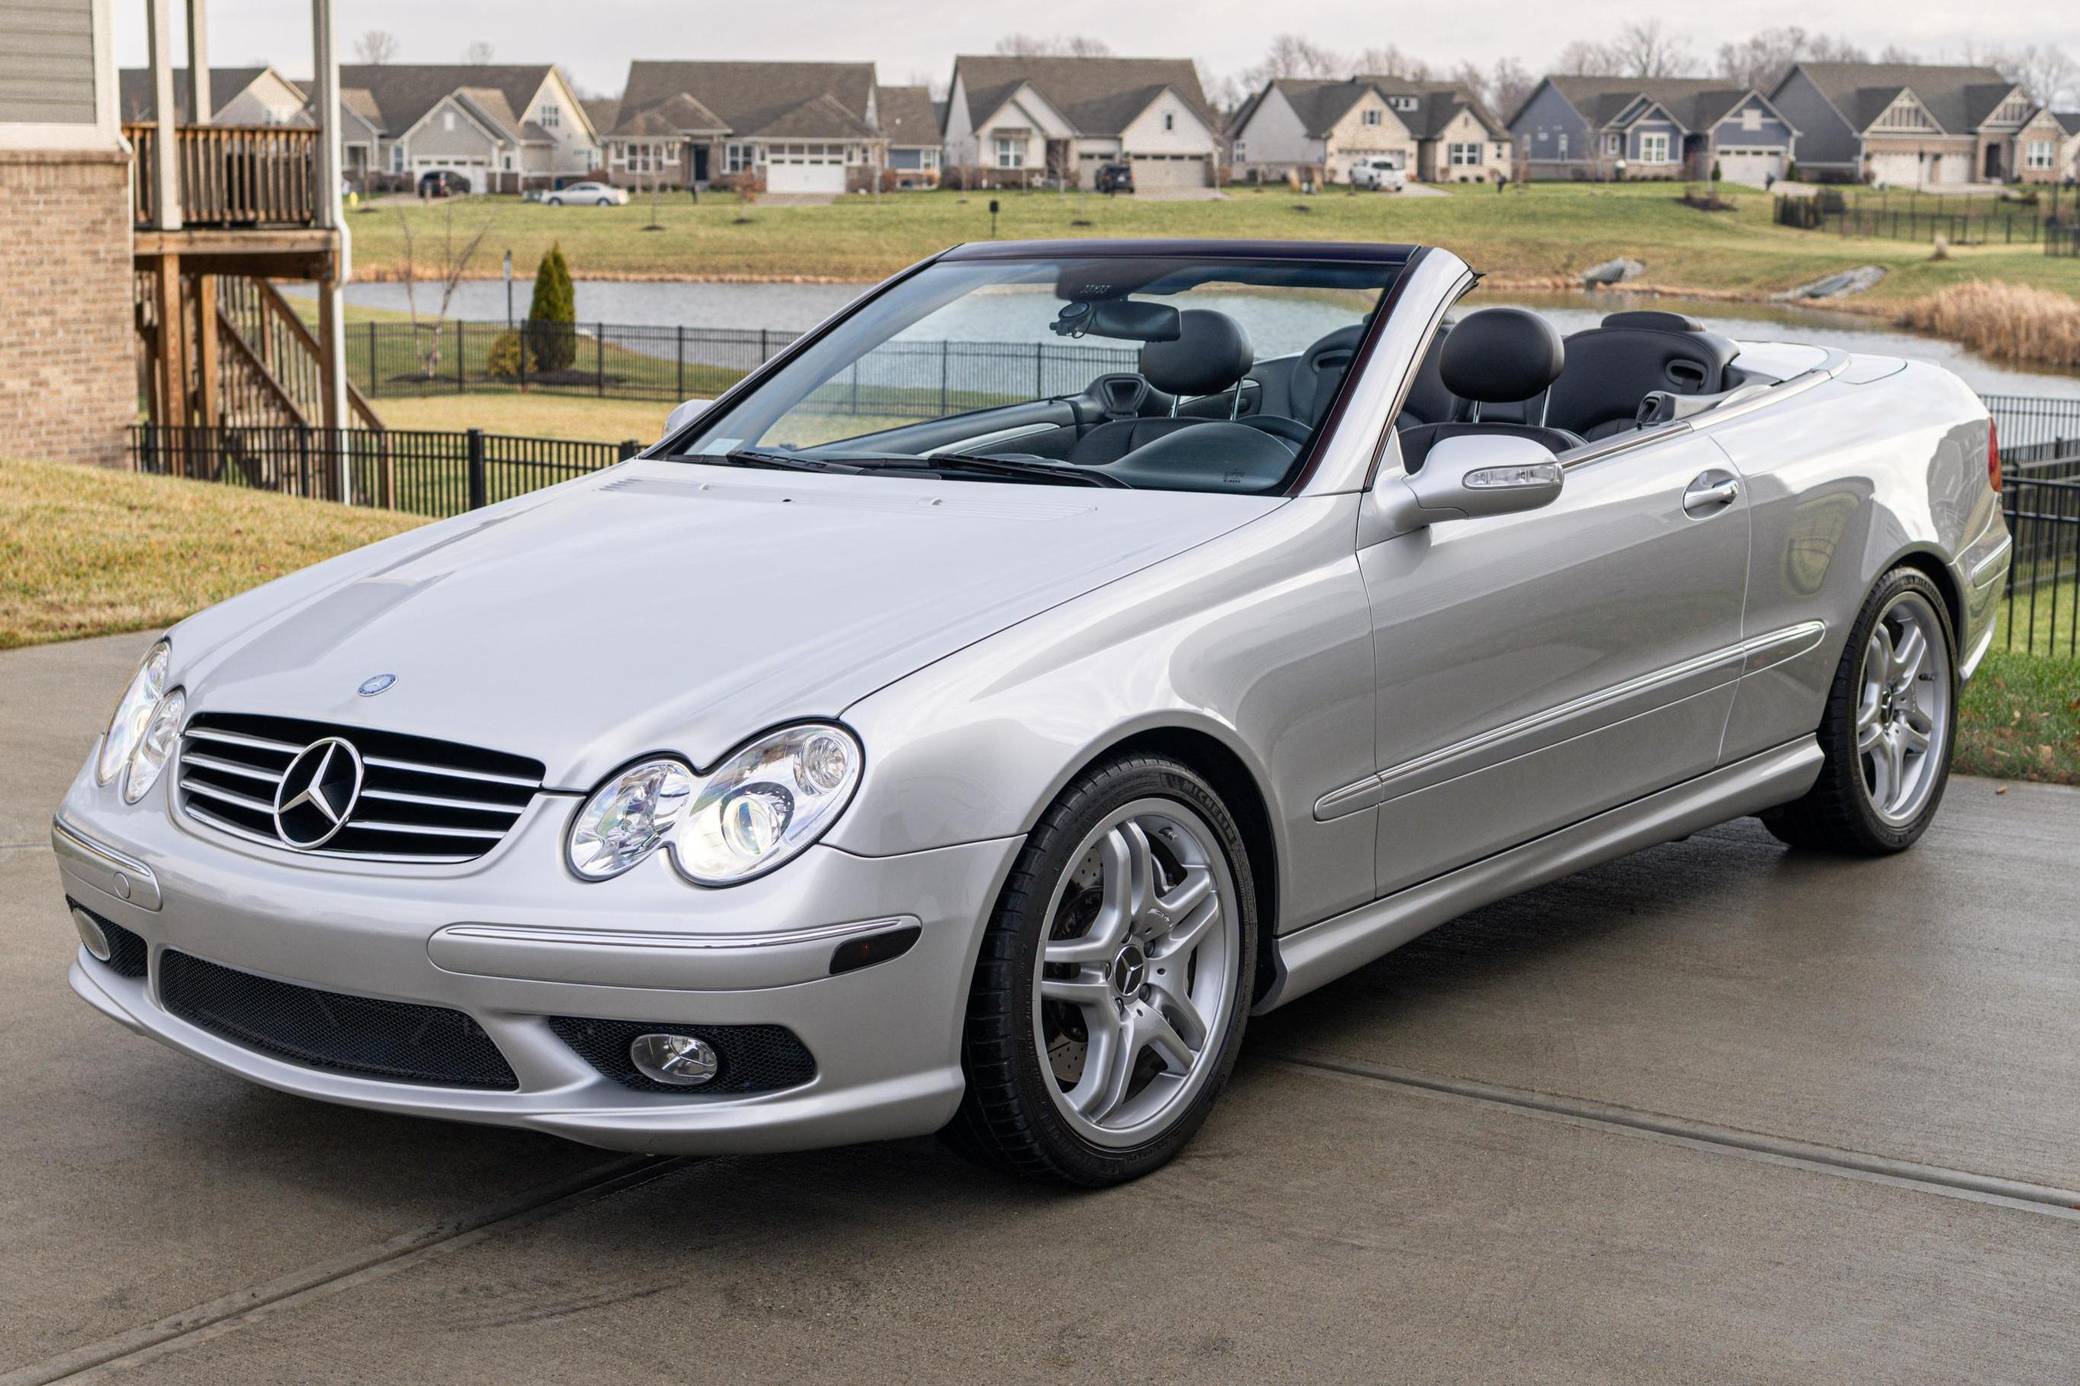 Sold: Mercedes-Benz CLK55 AMG Cabriolet Auctions - Lot 181 - Shannons